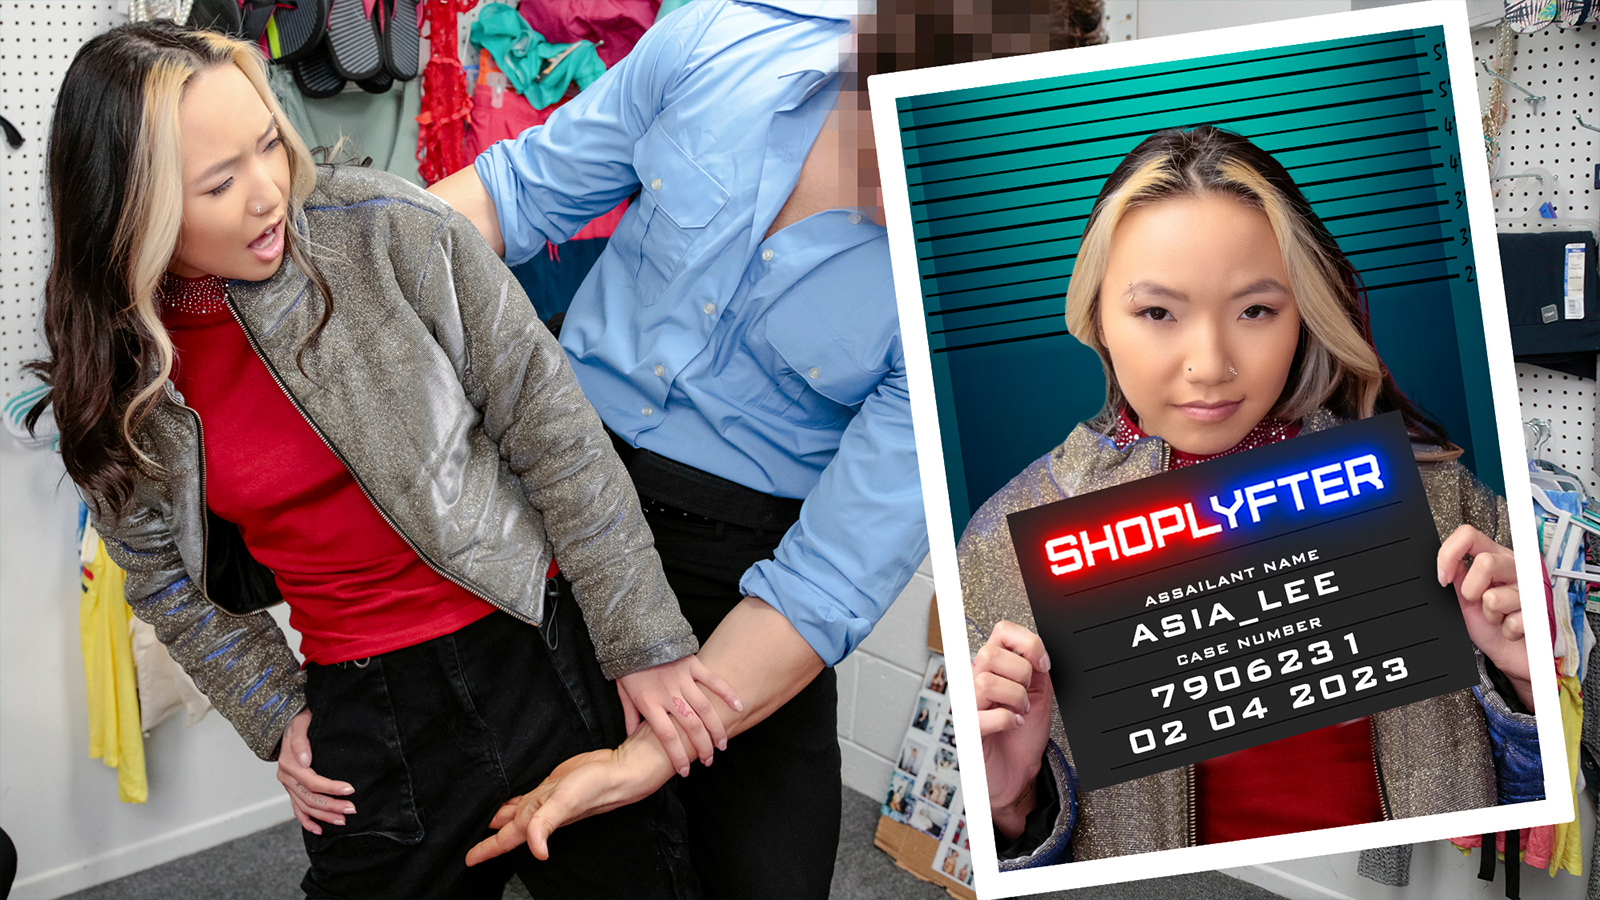 [Shoplyfter] Asia Lee (Case No. 7906231 – The Jacket Mishap)